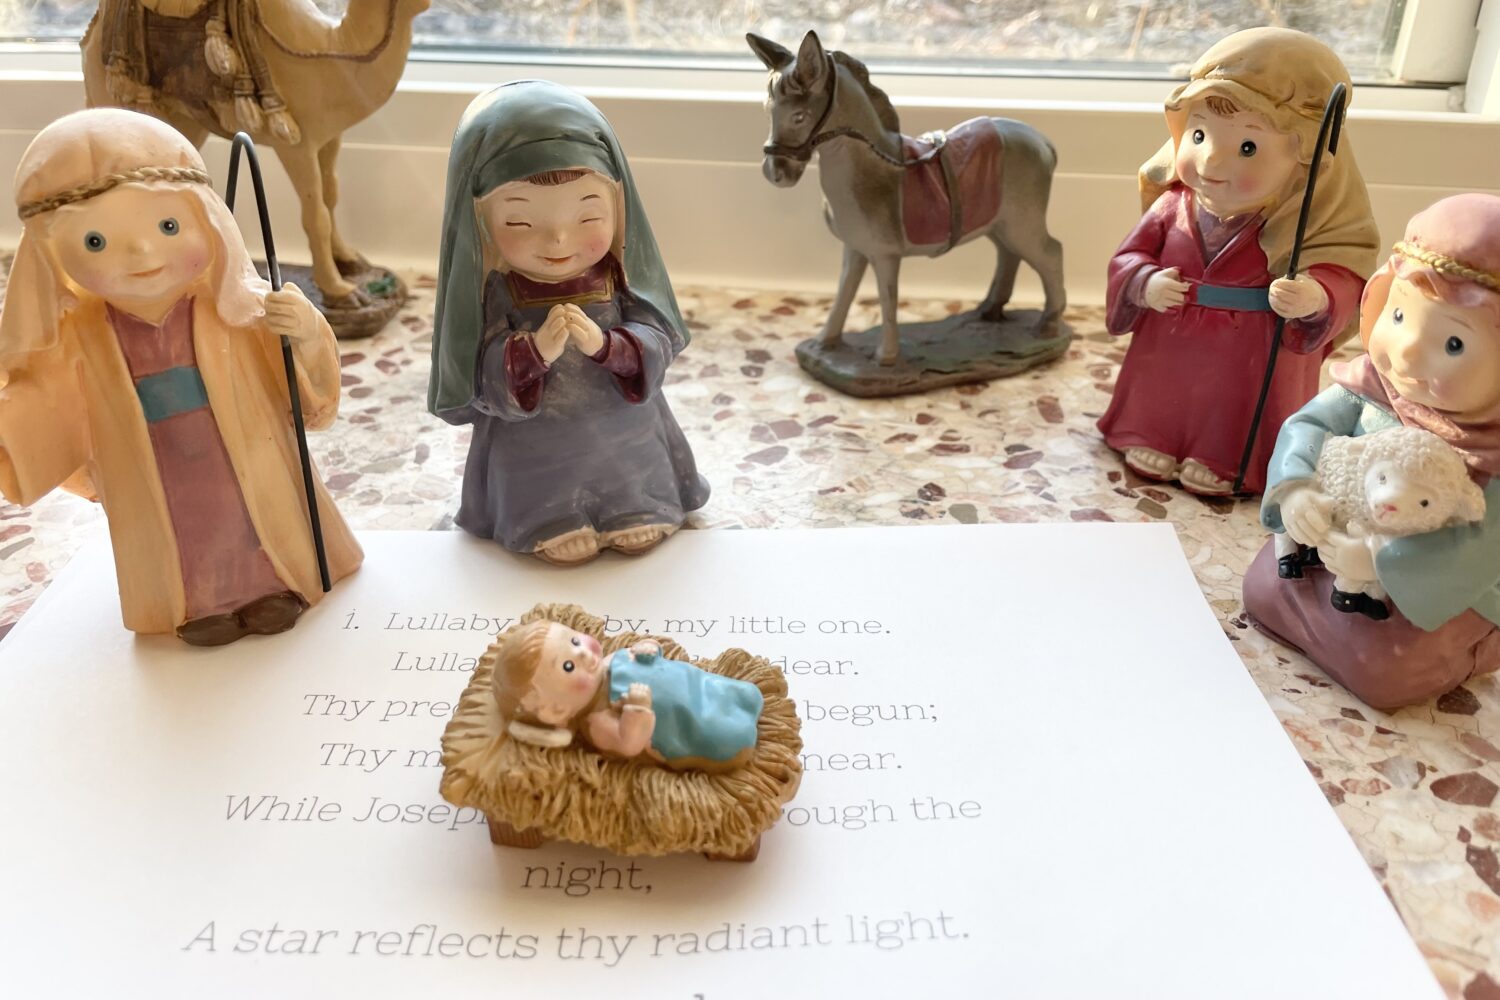 Mary's Lullaby Nativity Scene Activity Easy ideas for Music Leaders IMG 7626